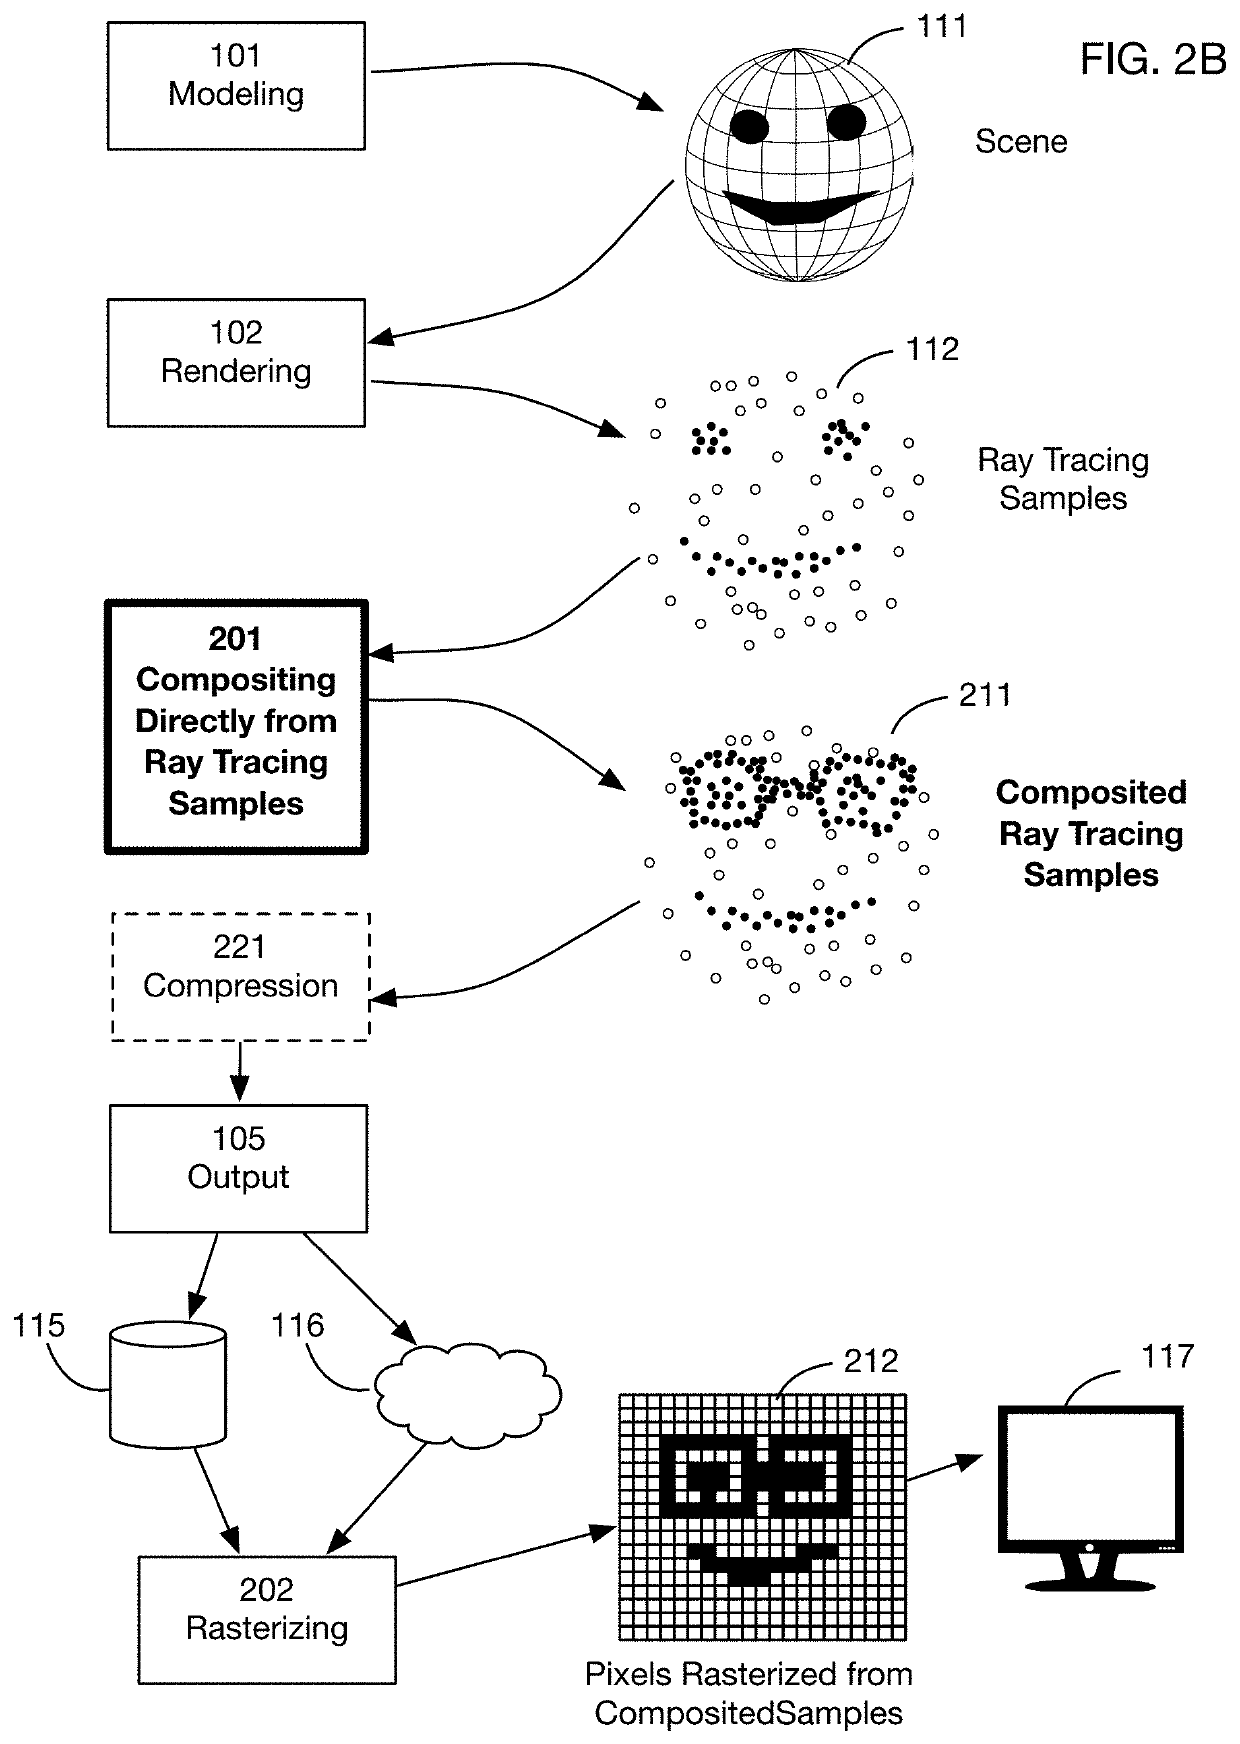 Non-rasterized image streaming system that uses ray tracing samples